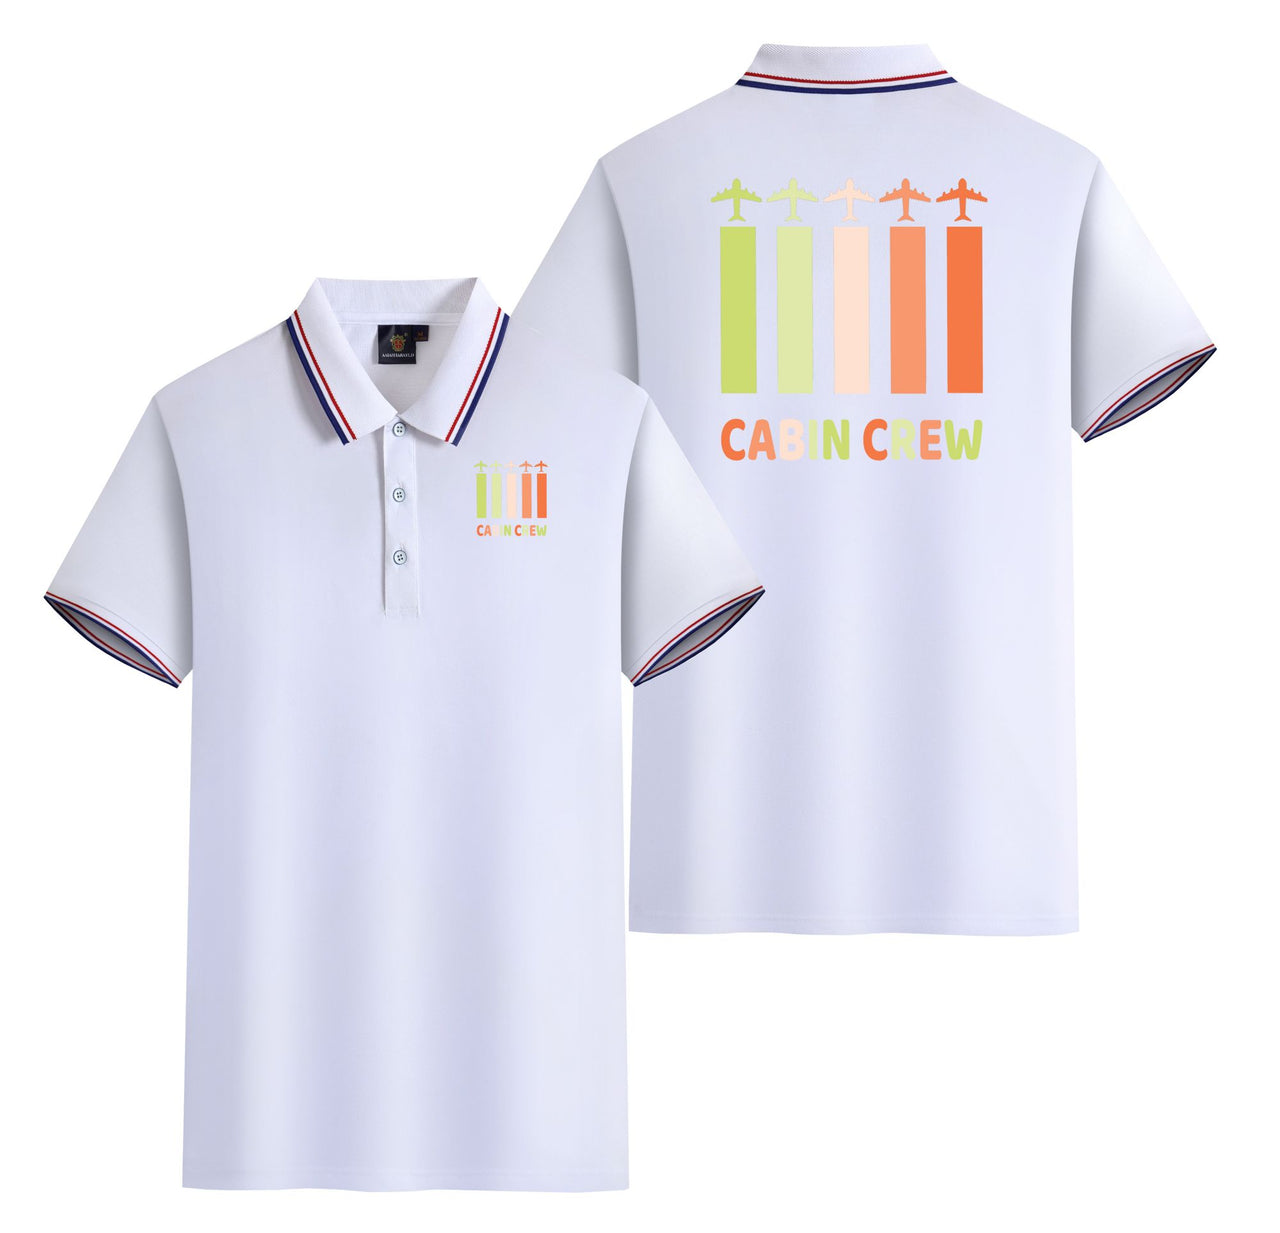 Colourful Cabin Crew Designed Stylish Polo T-Shirts (Double-Side)